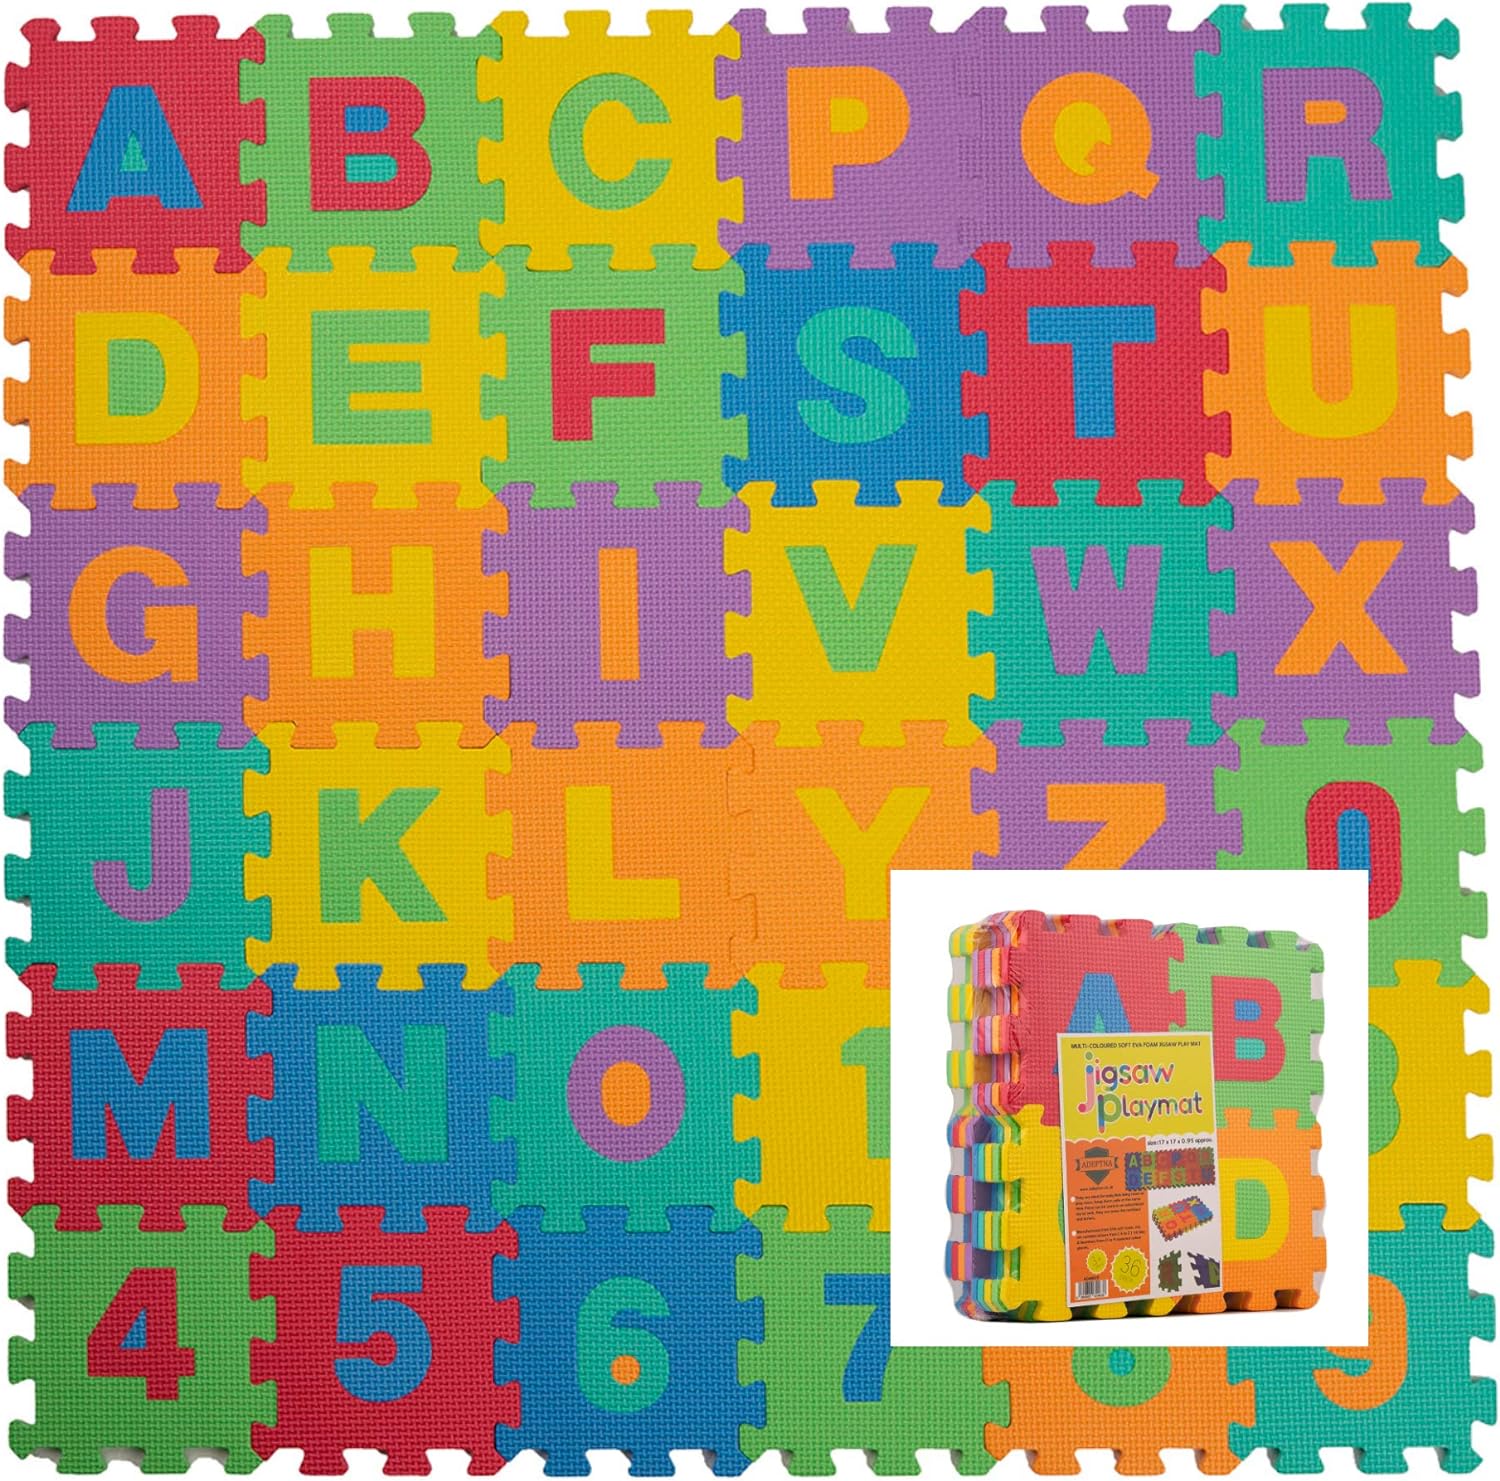 ADEPTNA 36 PCS MULTI-COLOURED SOFT EVA FOAM JIGSAW PLAY MAT LETTERS AND NUMBERS